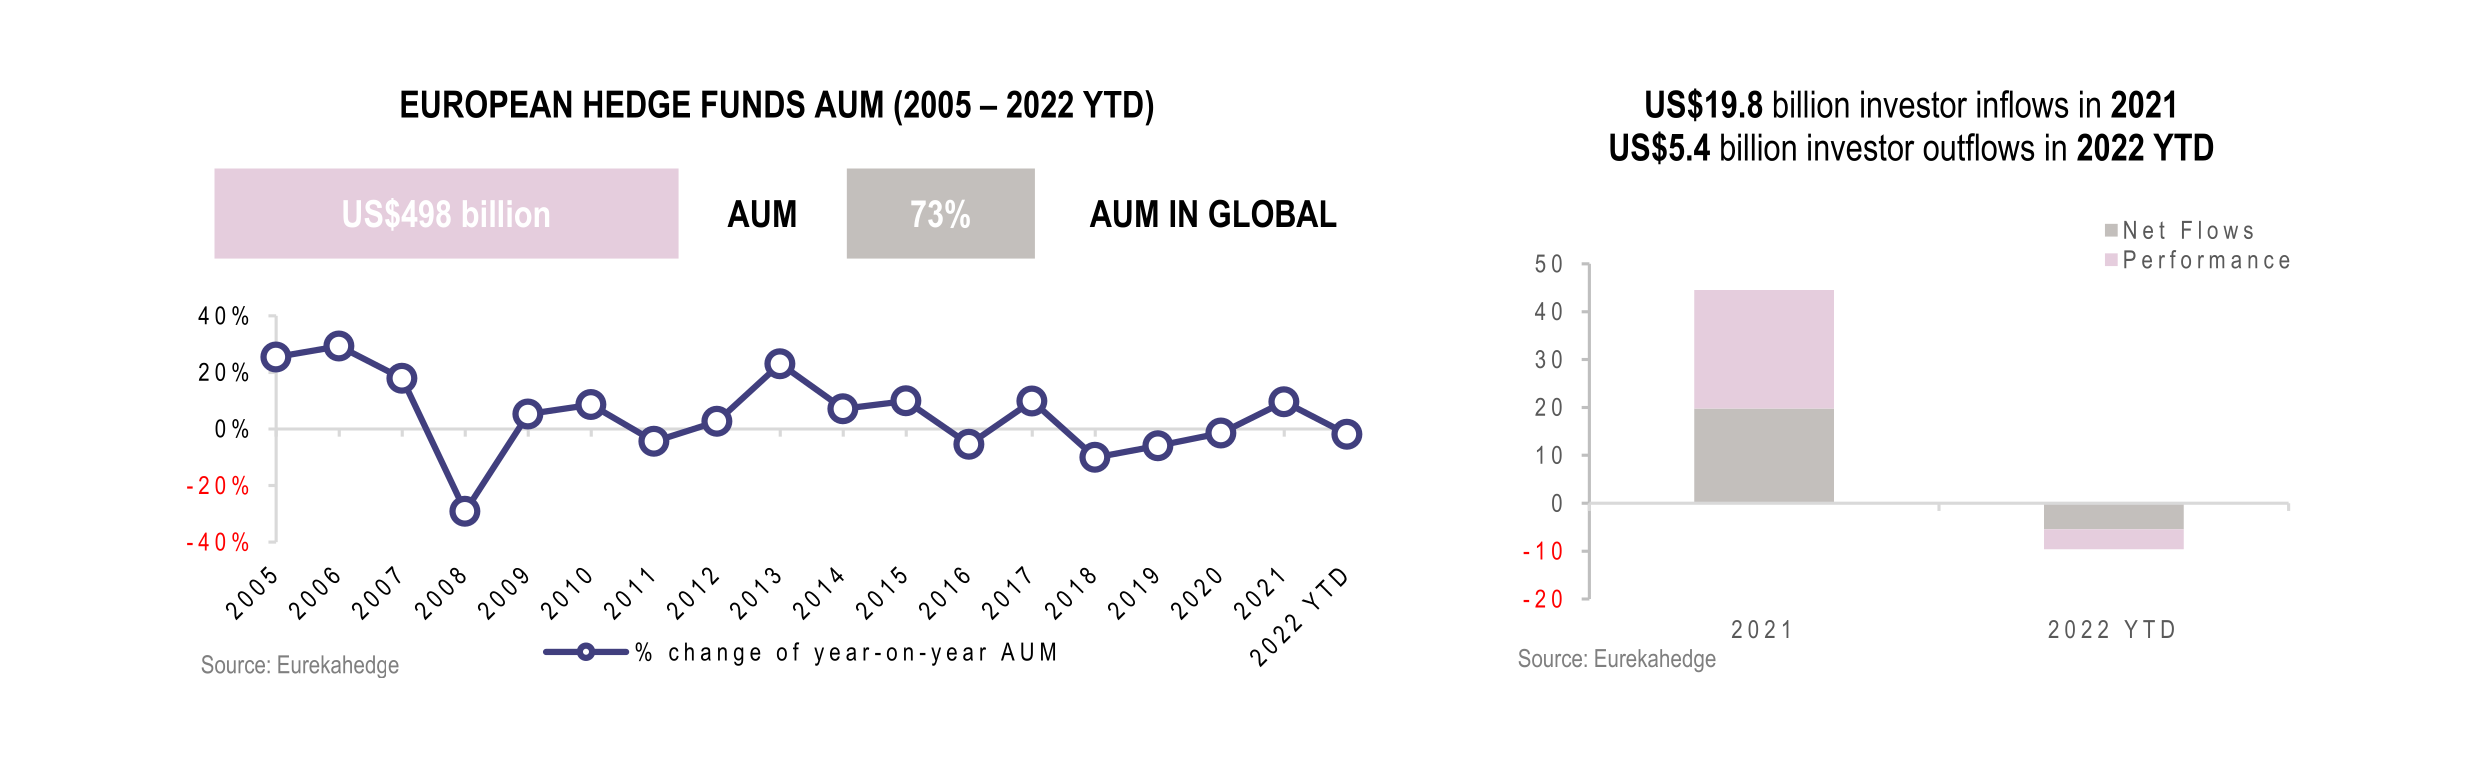 Global Hedge Funds Infographic May 2022 - AUM